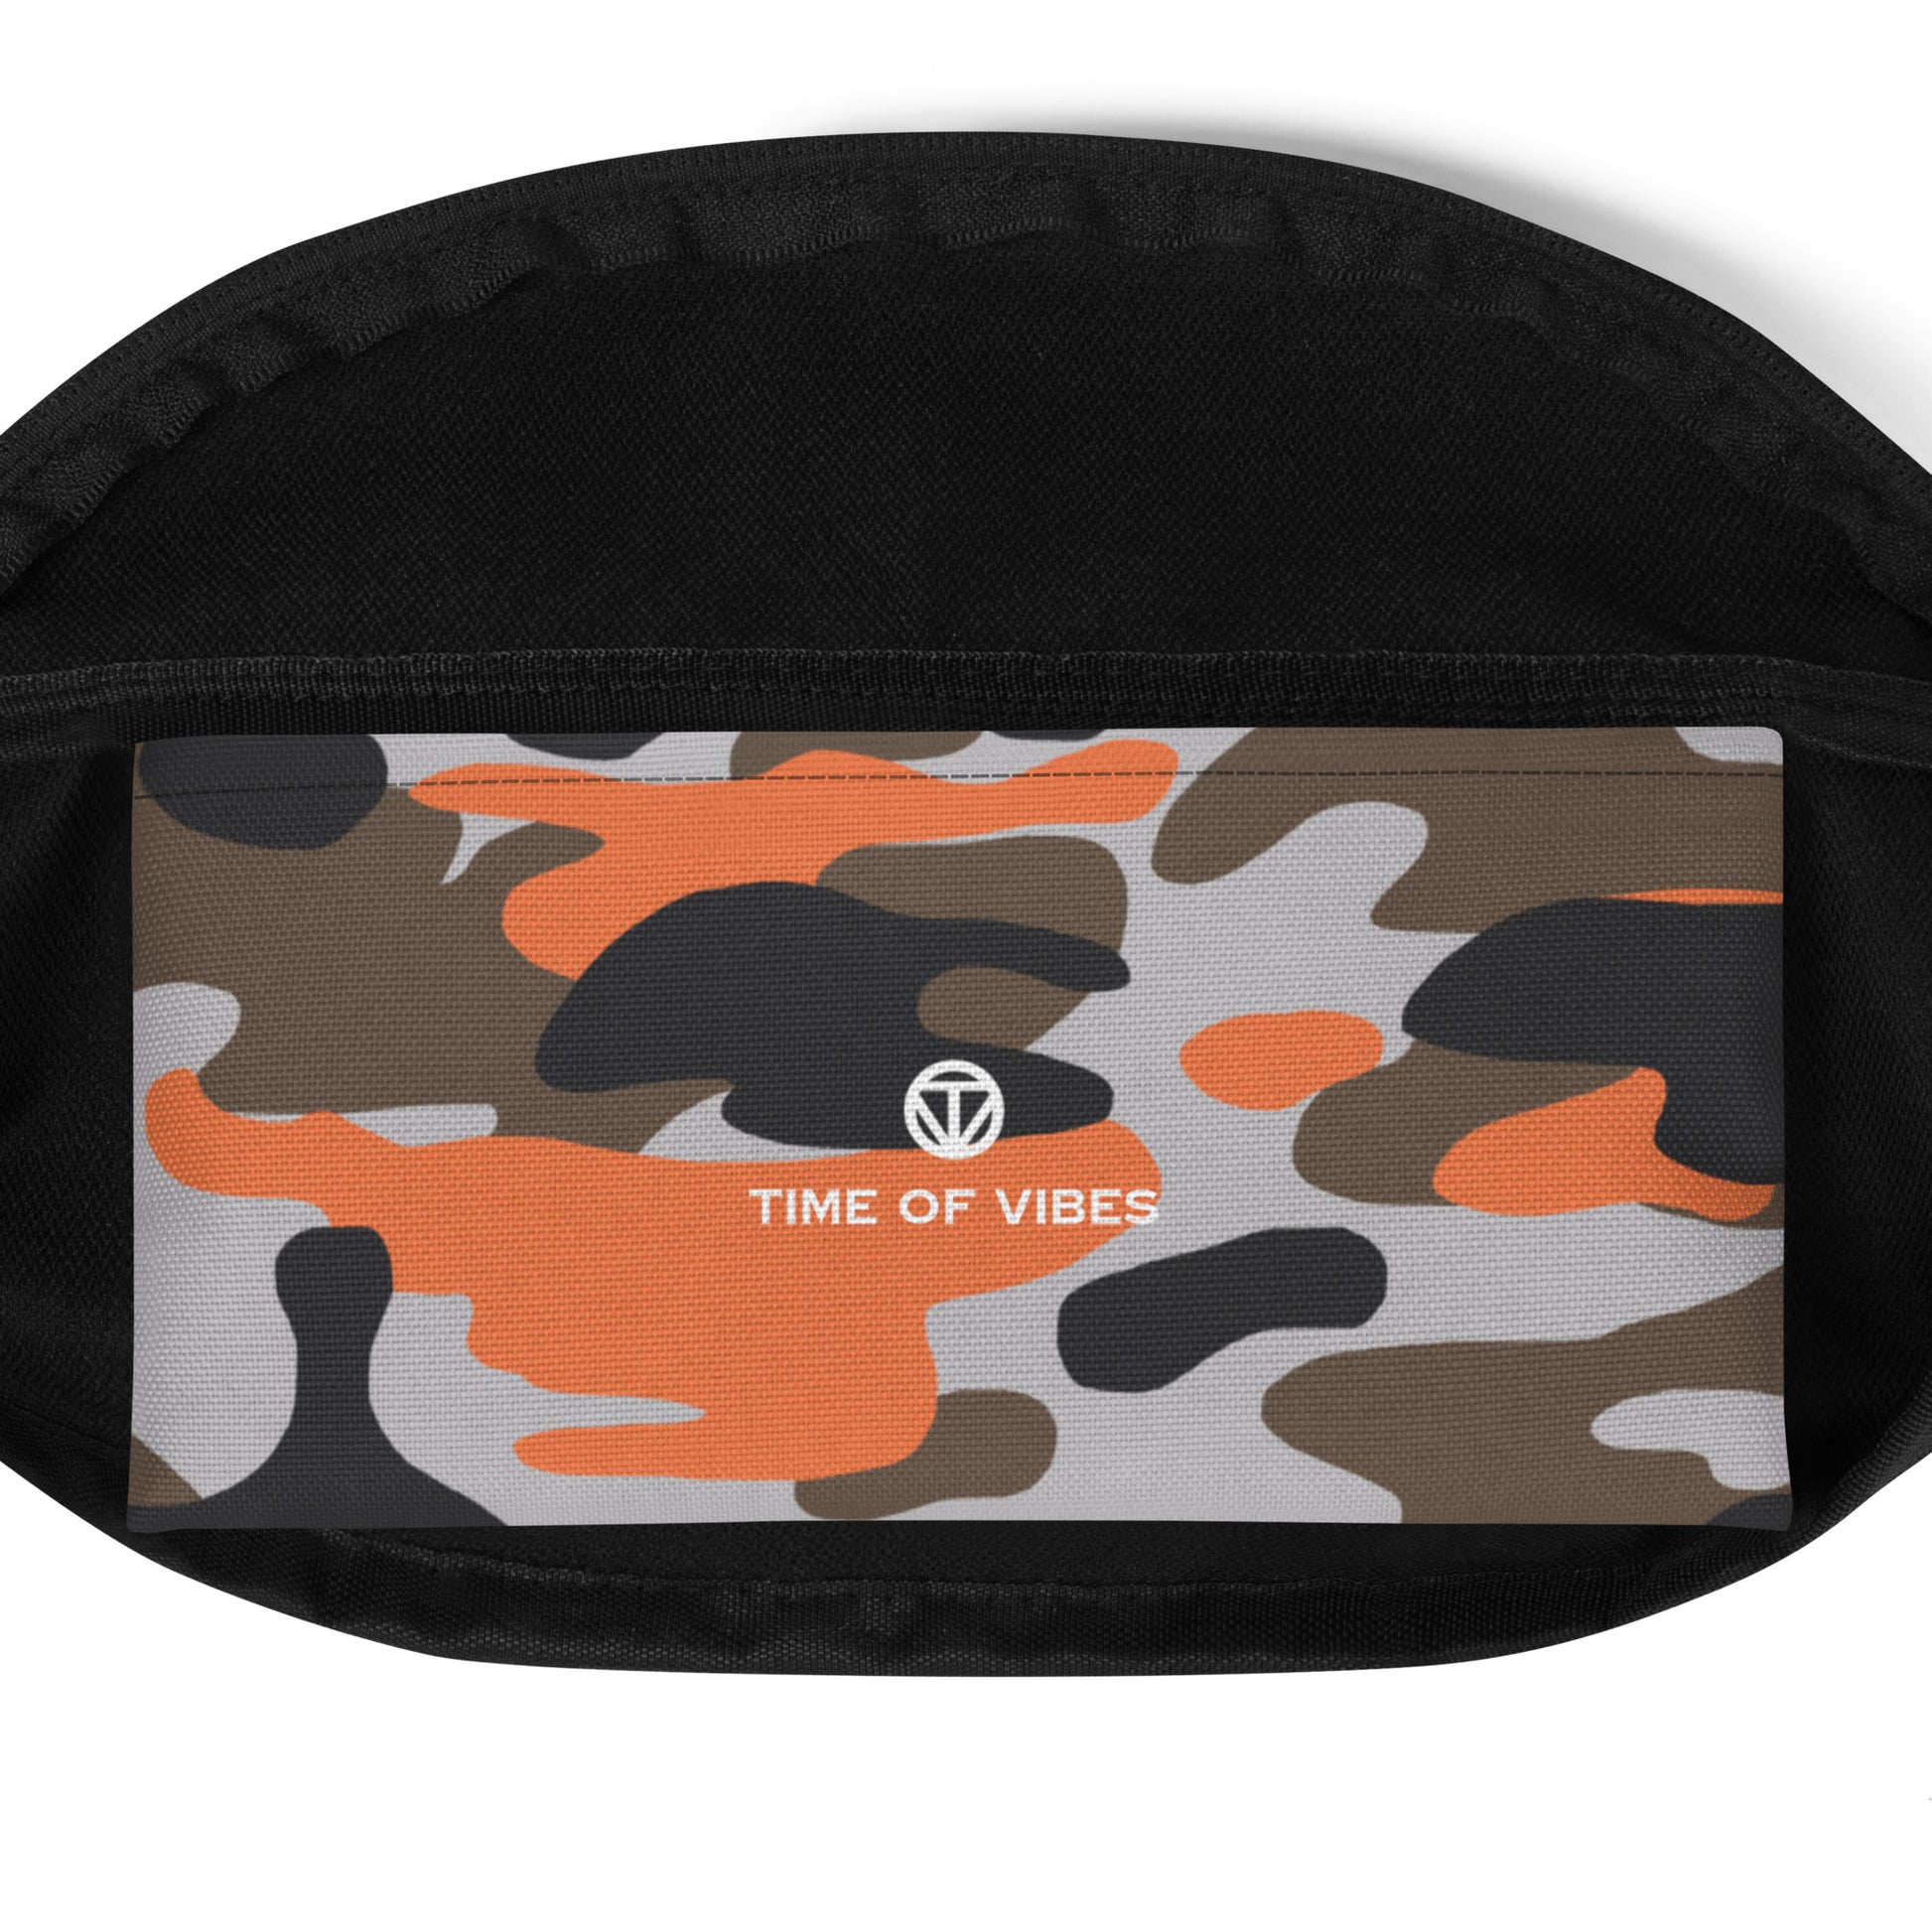 TIME OF VIBES - Fanny Pack CAMO - €42.00